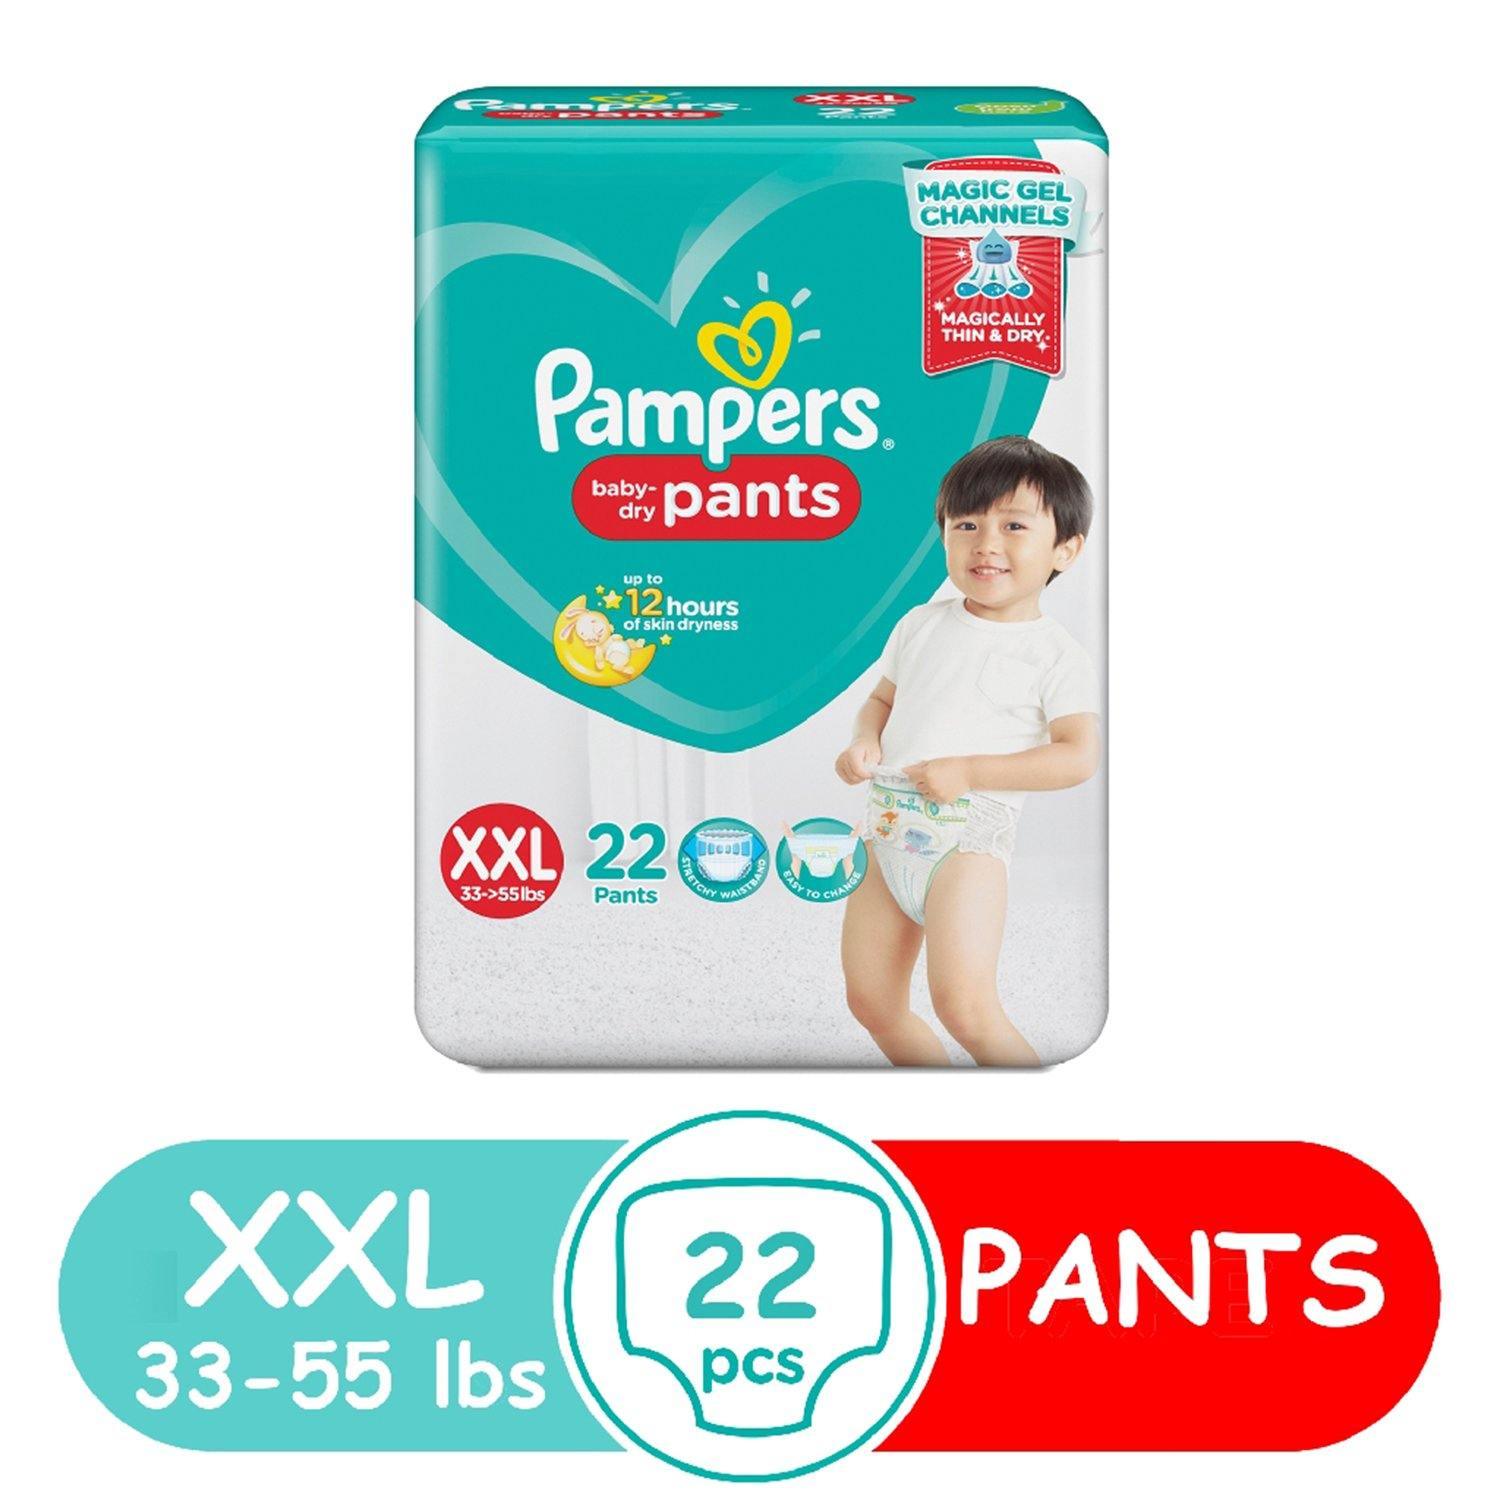 Bumtum Chota Bheem Baby Diaper Pants with Leakage Protection (XXL, 22  Count, Pack of 1)